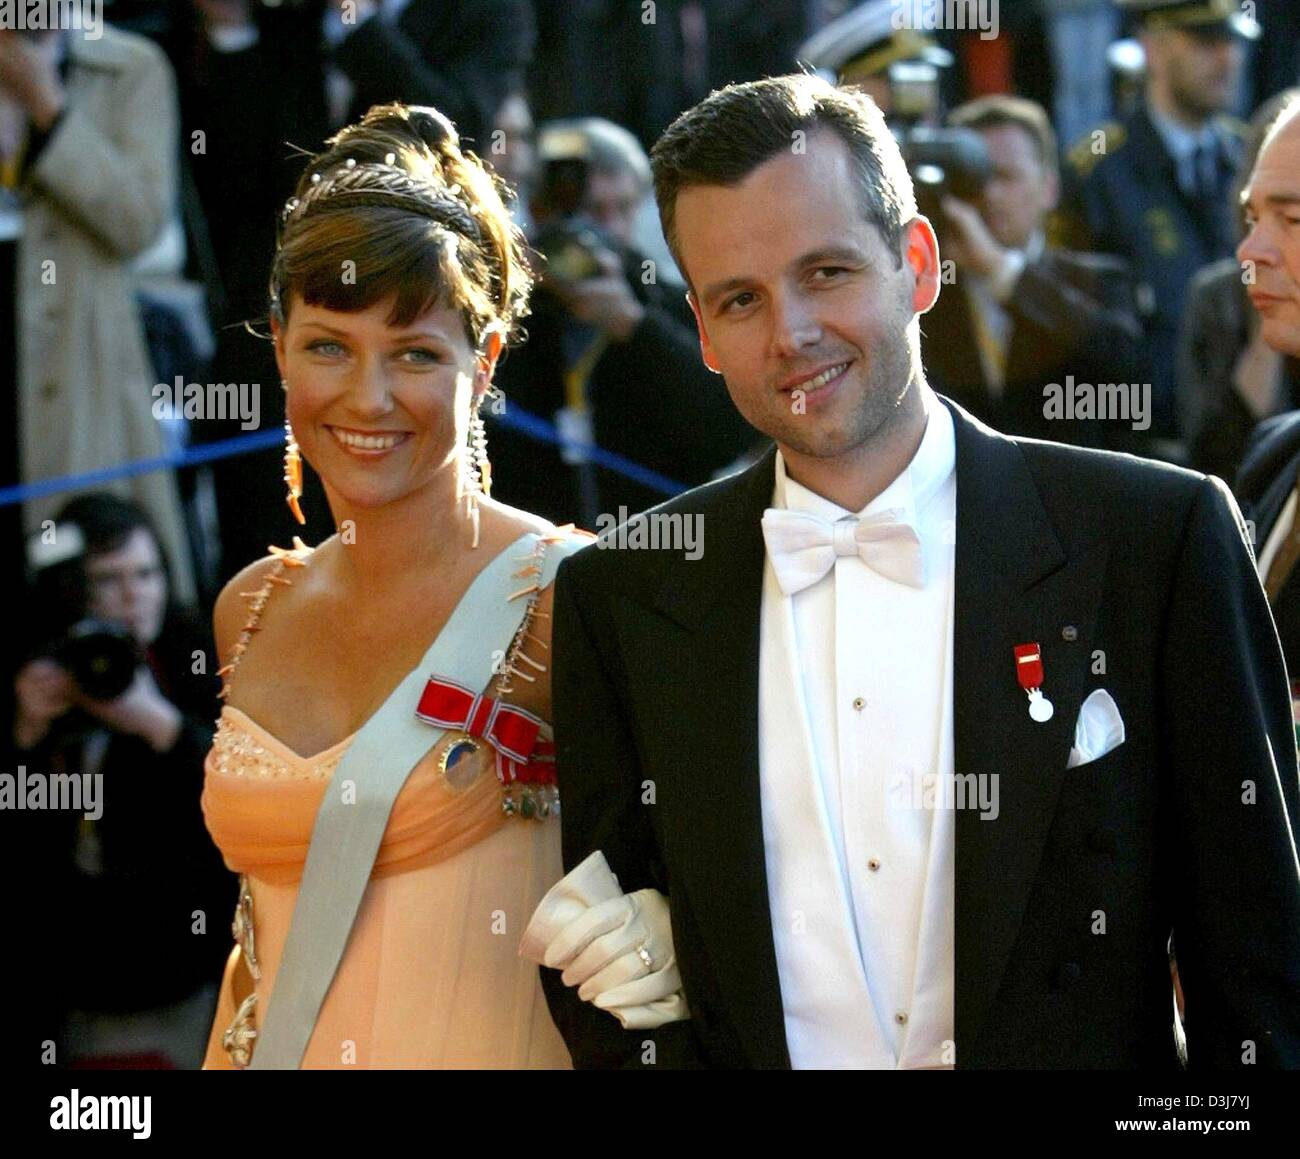 (dpa) - On the eve of the wedding of Crown Prince Frederik of Denmark and Mary Donaldson, Princess Maertha Louise of Norway and her husband Ari Behn arrive for a gala at the Royal Theatre in Copenhagen, Denmark, 13 May 2004. Stock Photo